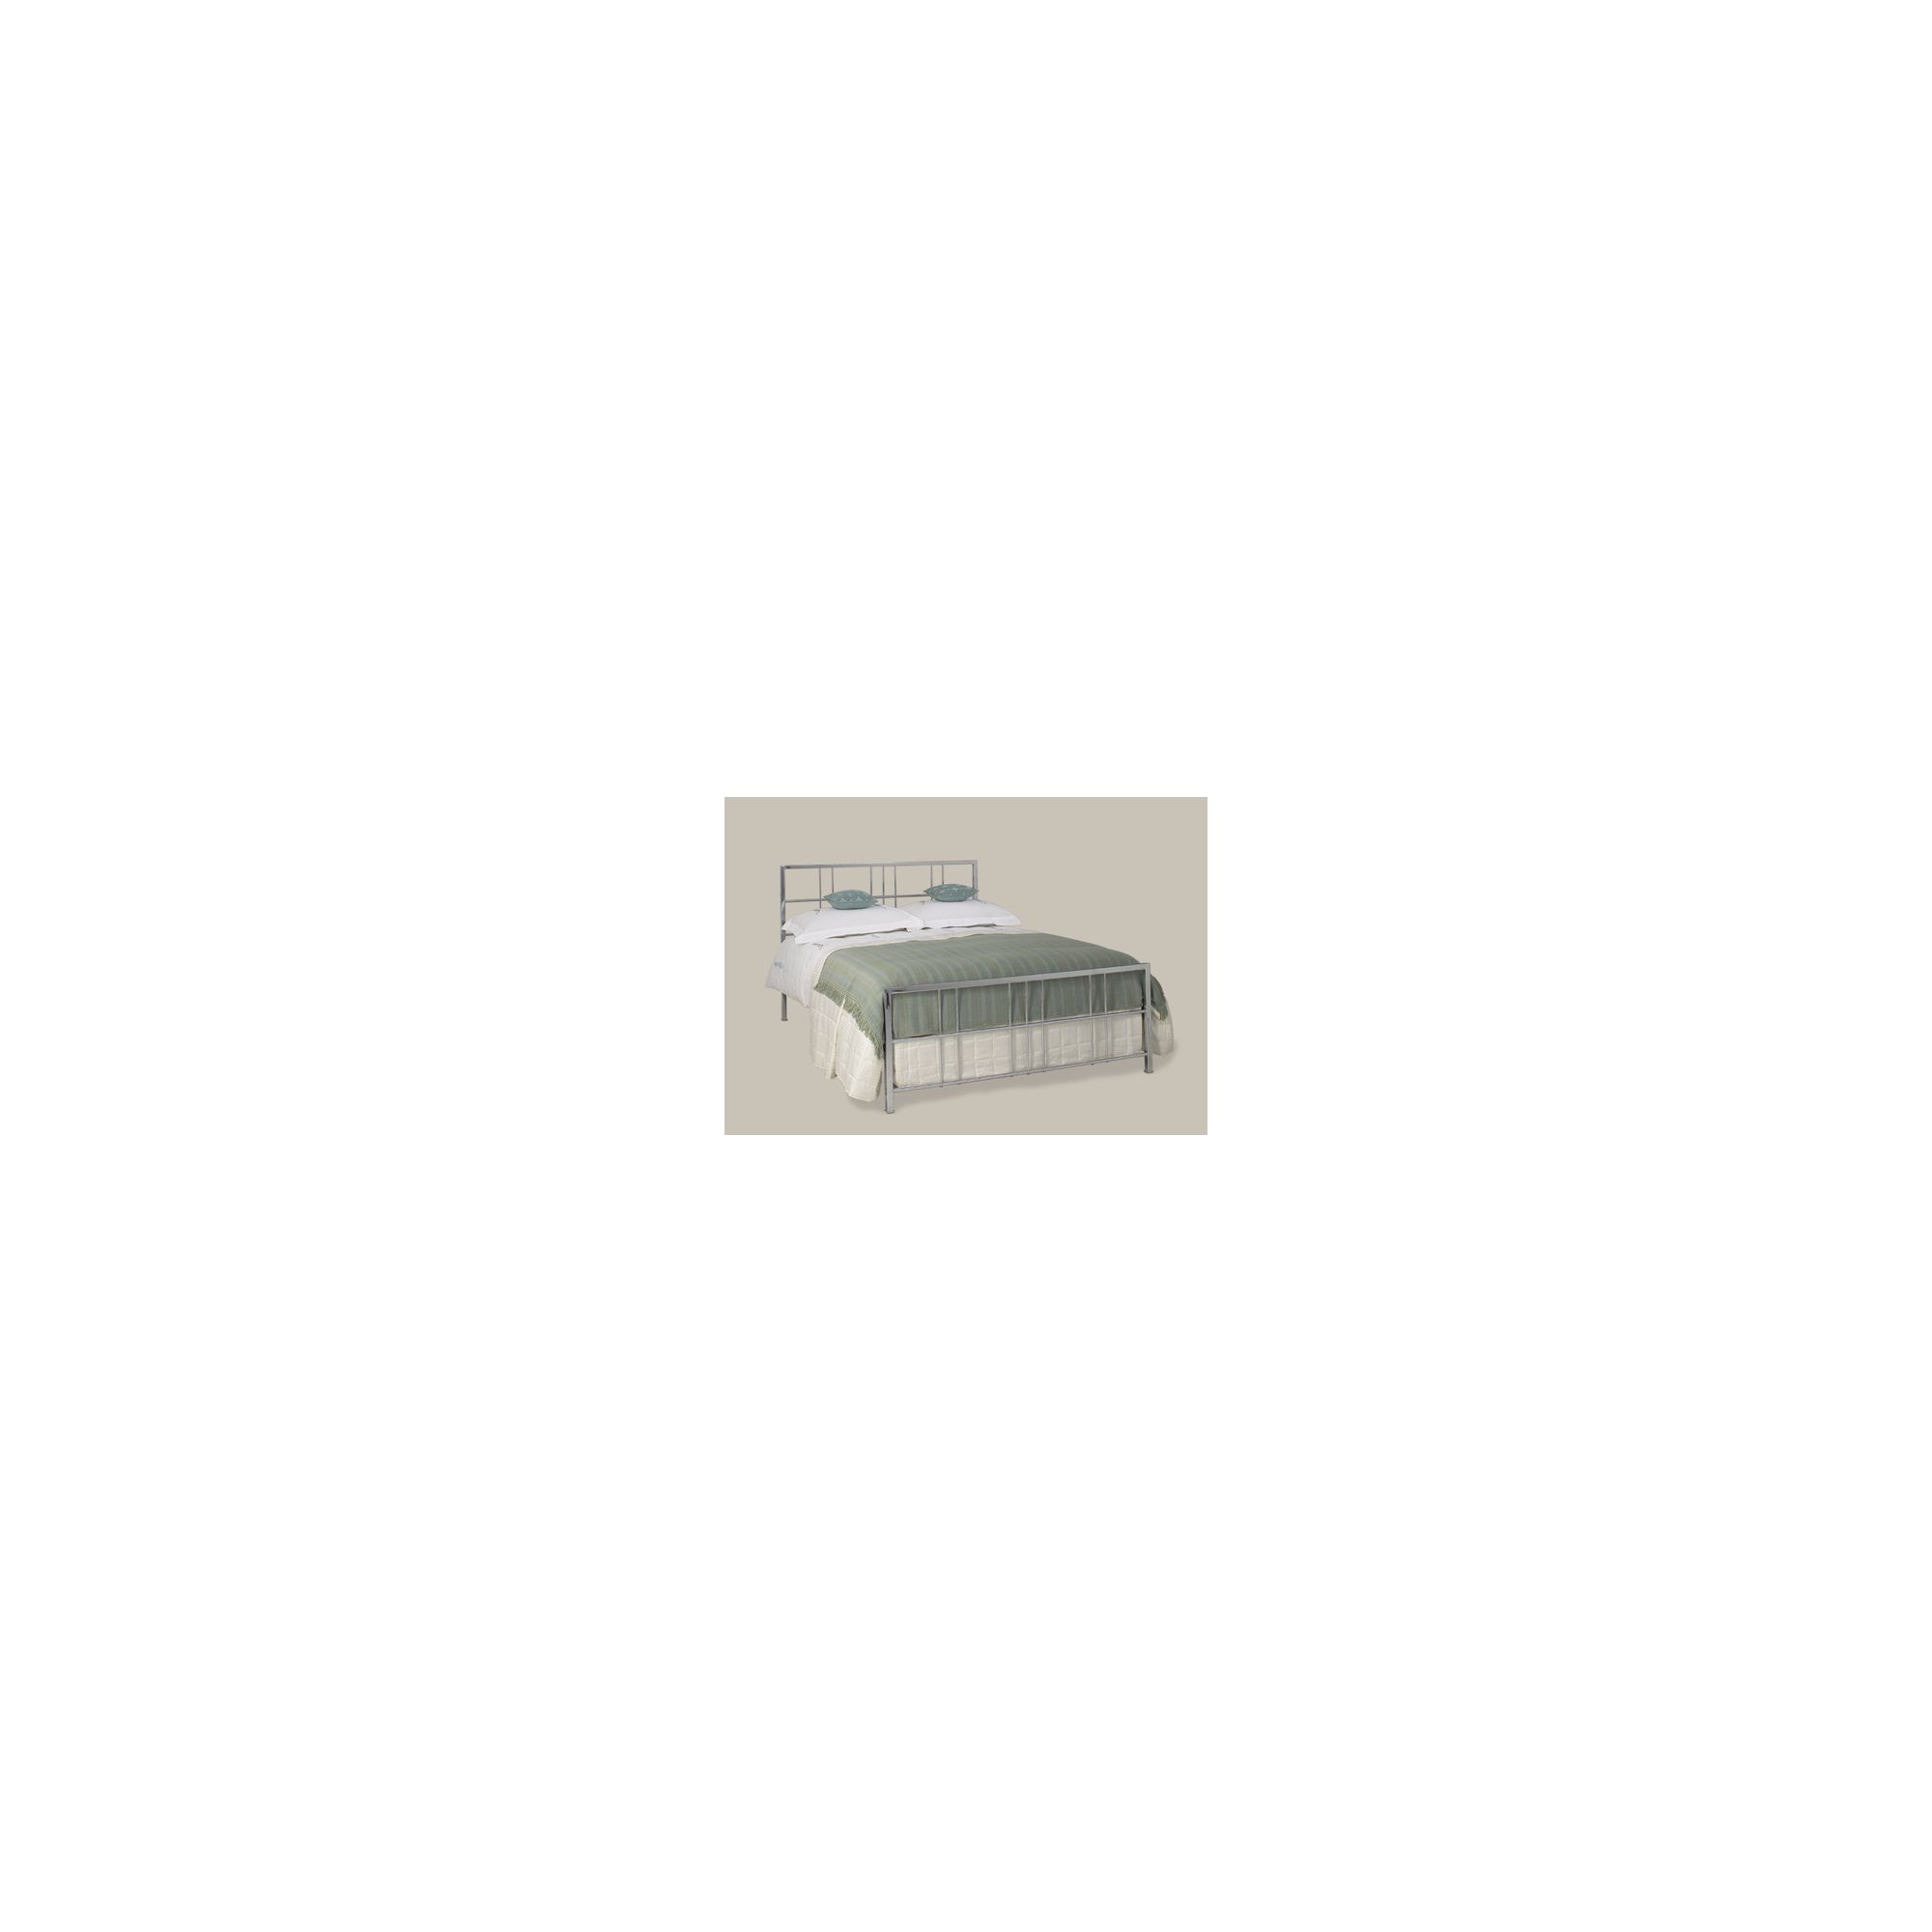 OBC Tain Bed Frame - Double at Tesco Direct